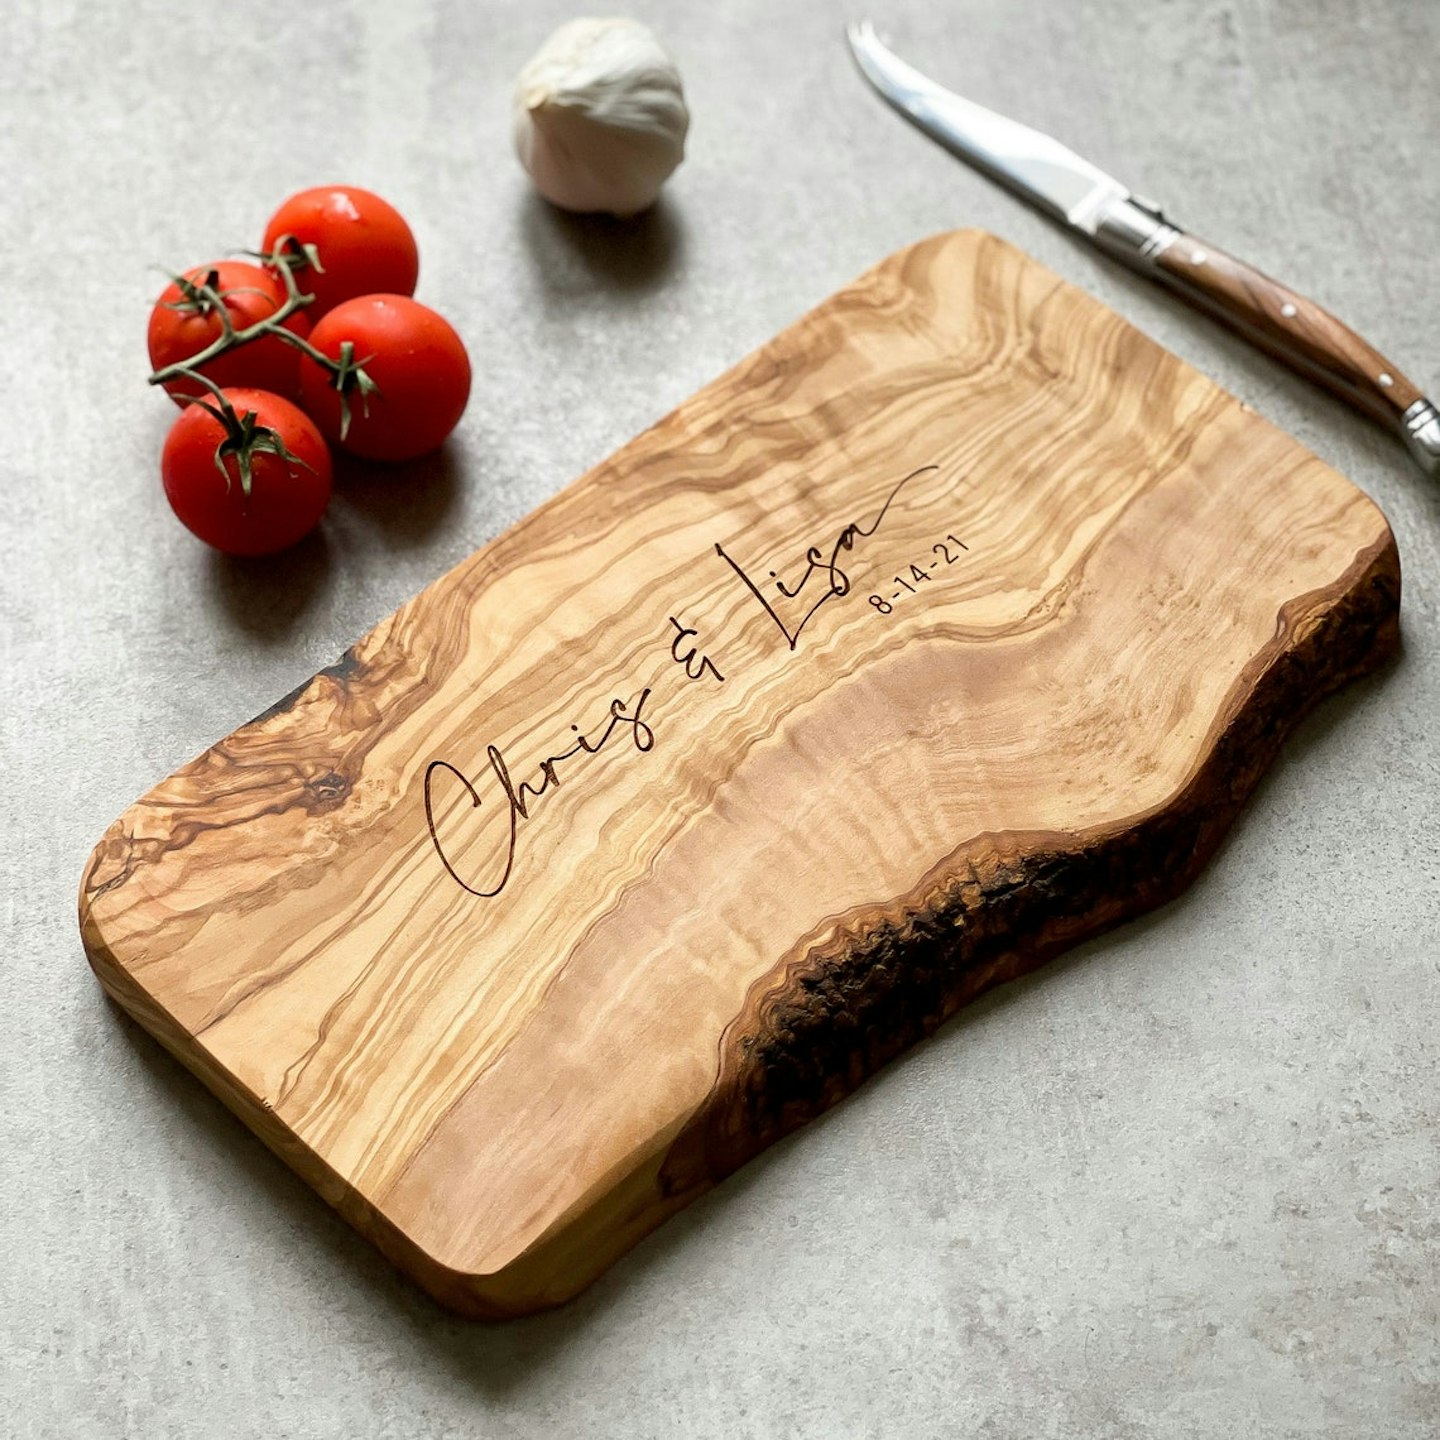 Etsy, Personalized Rustic Olive Wood Cutting Board, From £25.99